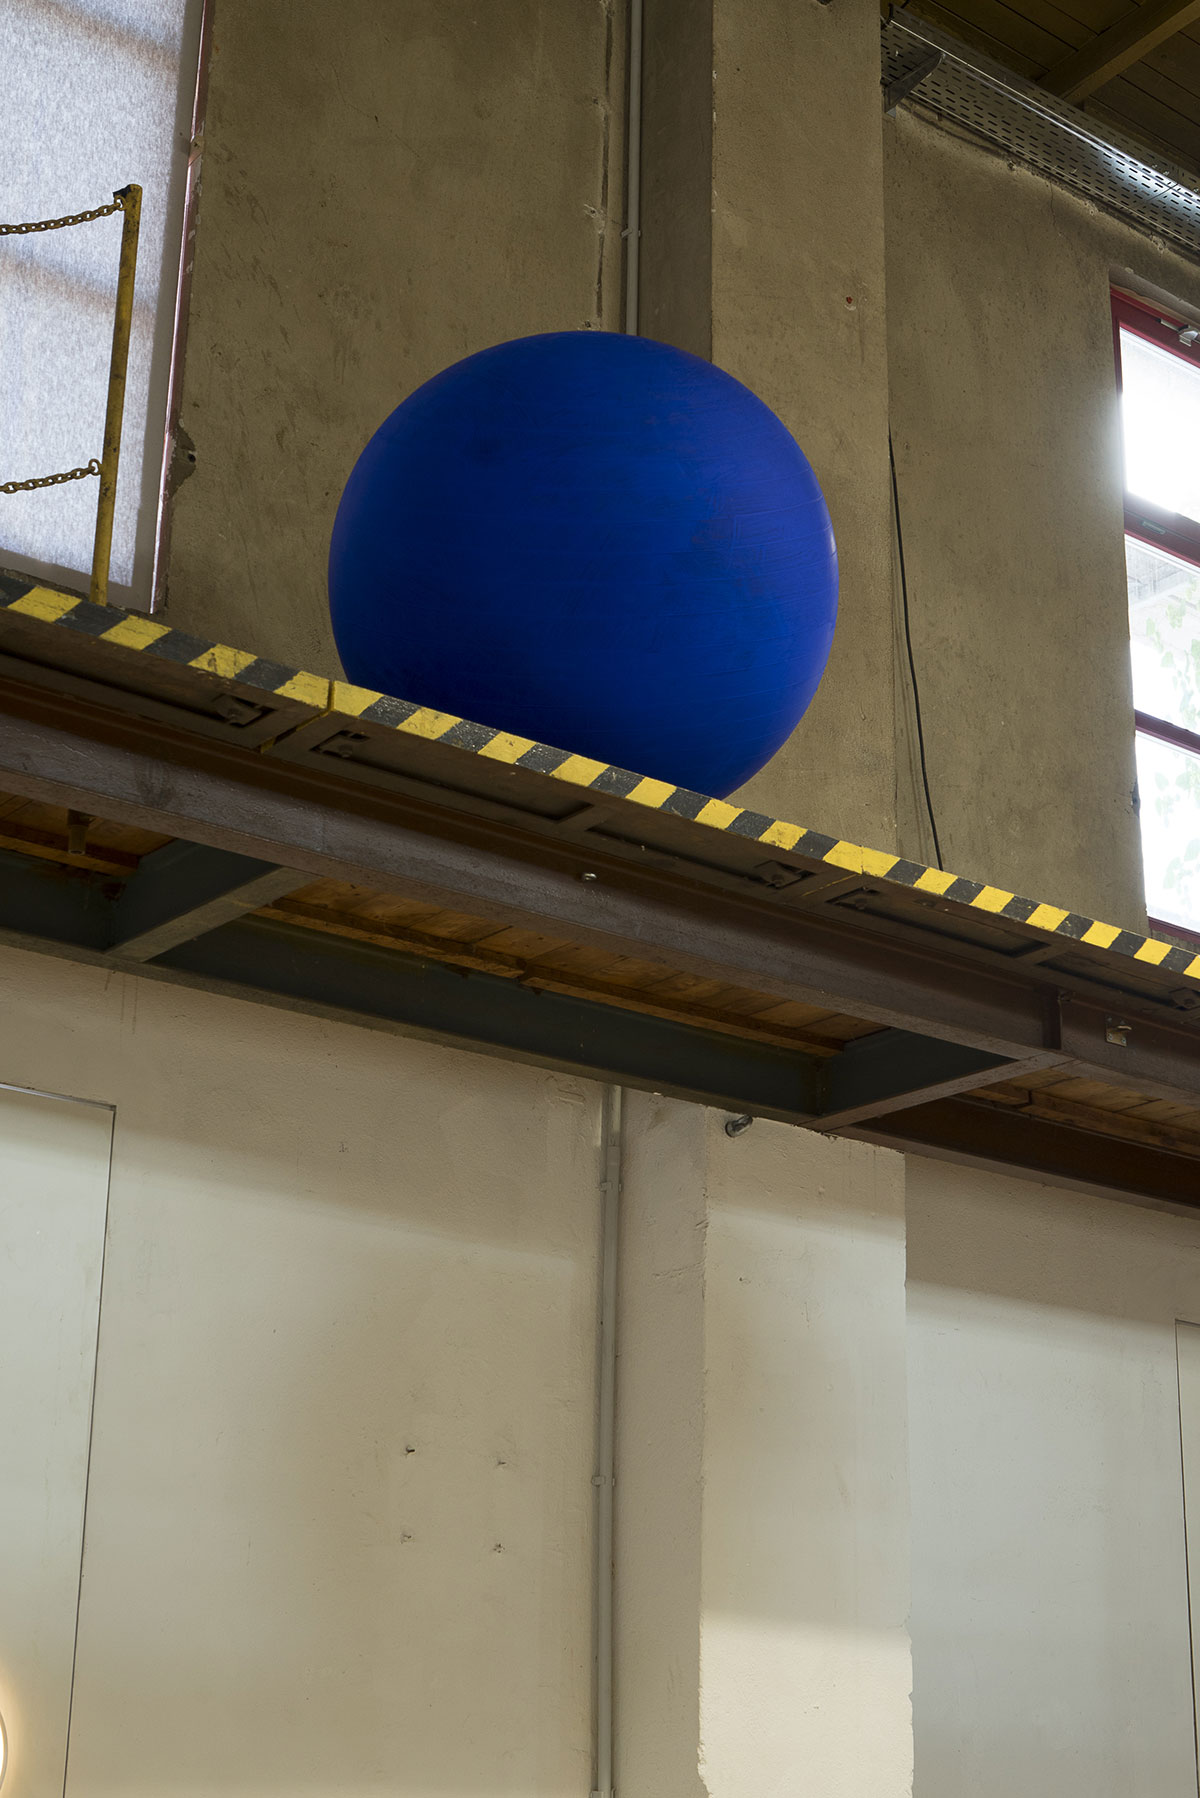 Save the Day, The Day Yves Klein Lost his Marbles in a Laundry, (Detail), Ausstellungsansicht GEH8, Dresden, 2020